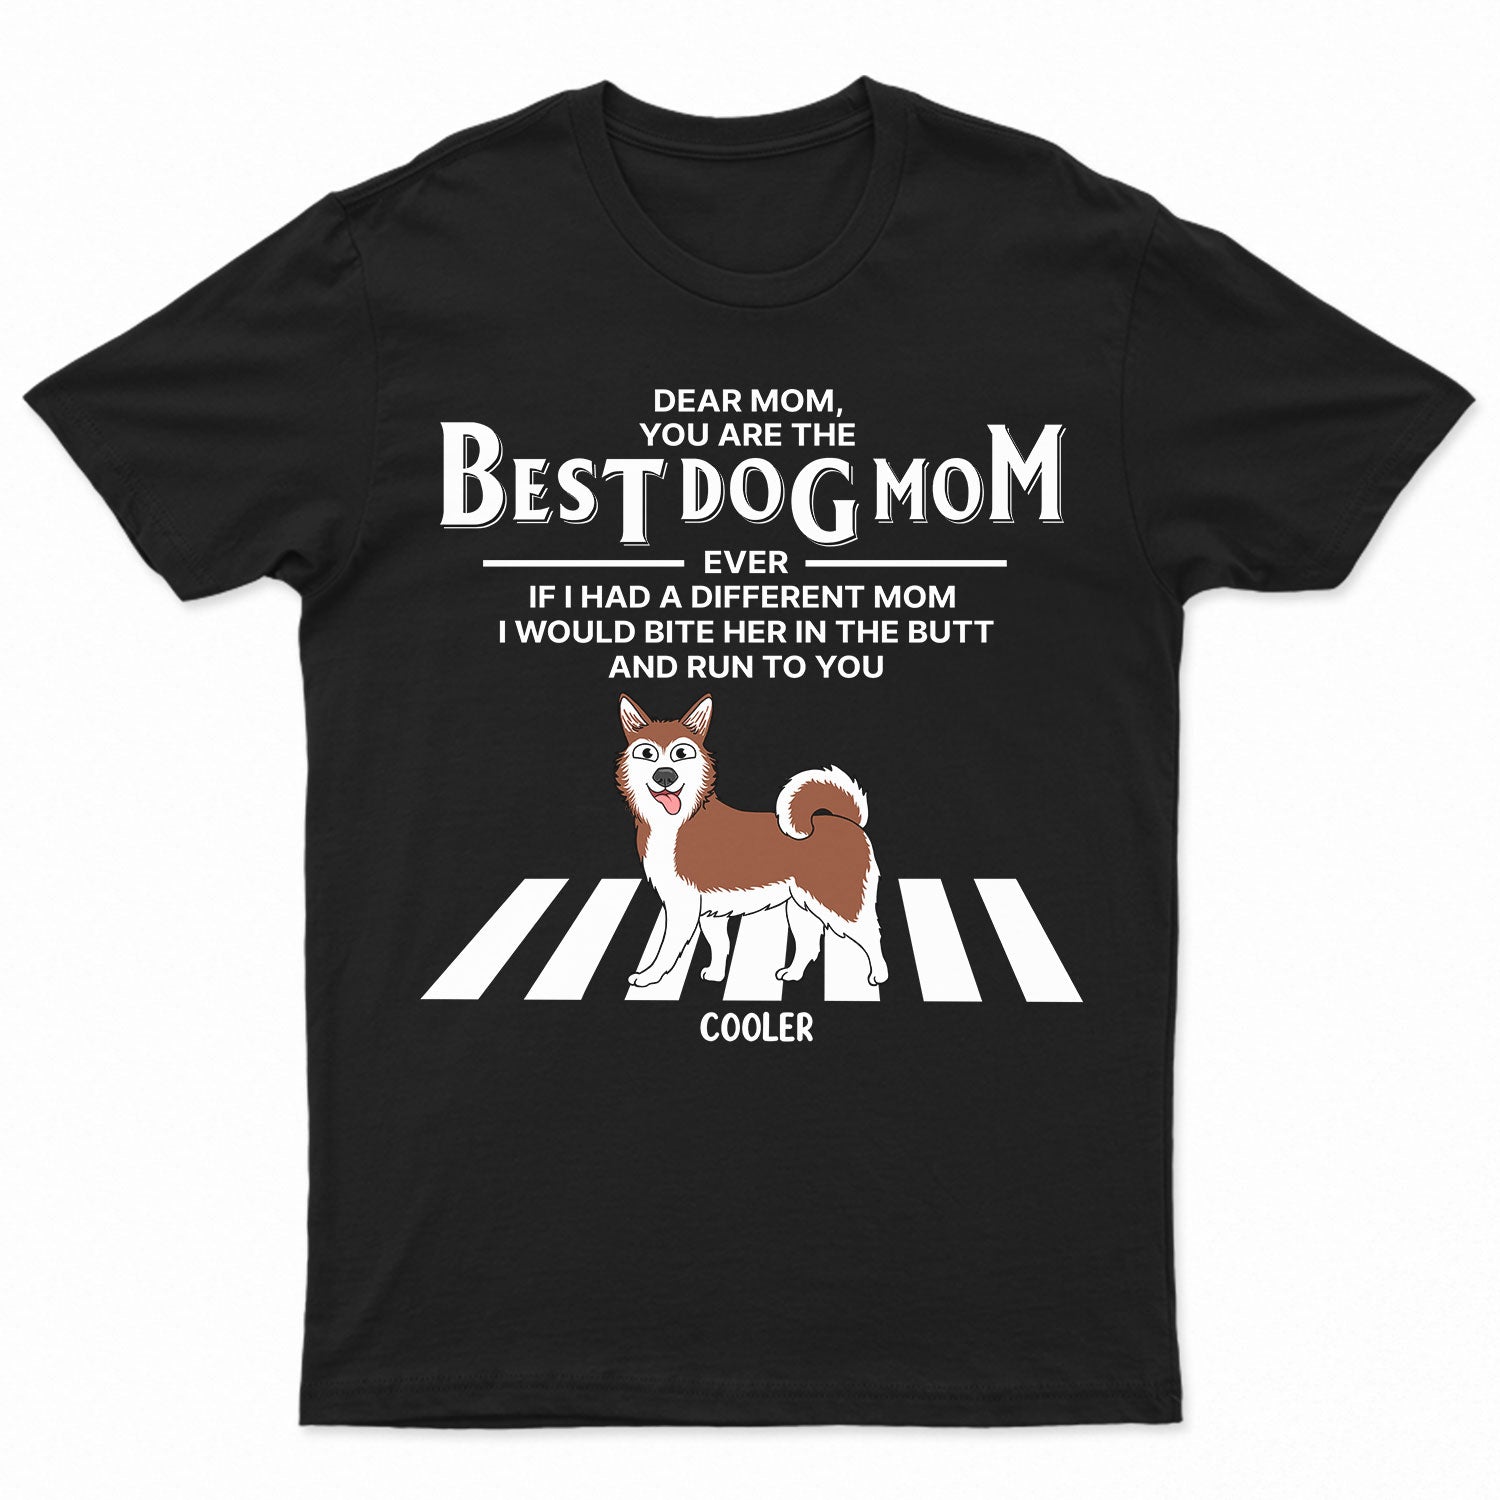 Dogs Run To You - Funny Gift For Dog Lovers, Dog Mom, Dog Dad - Personalized T Shirt